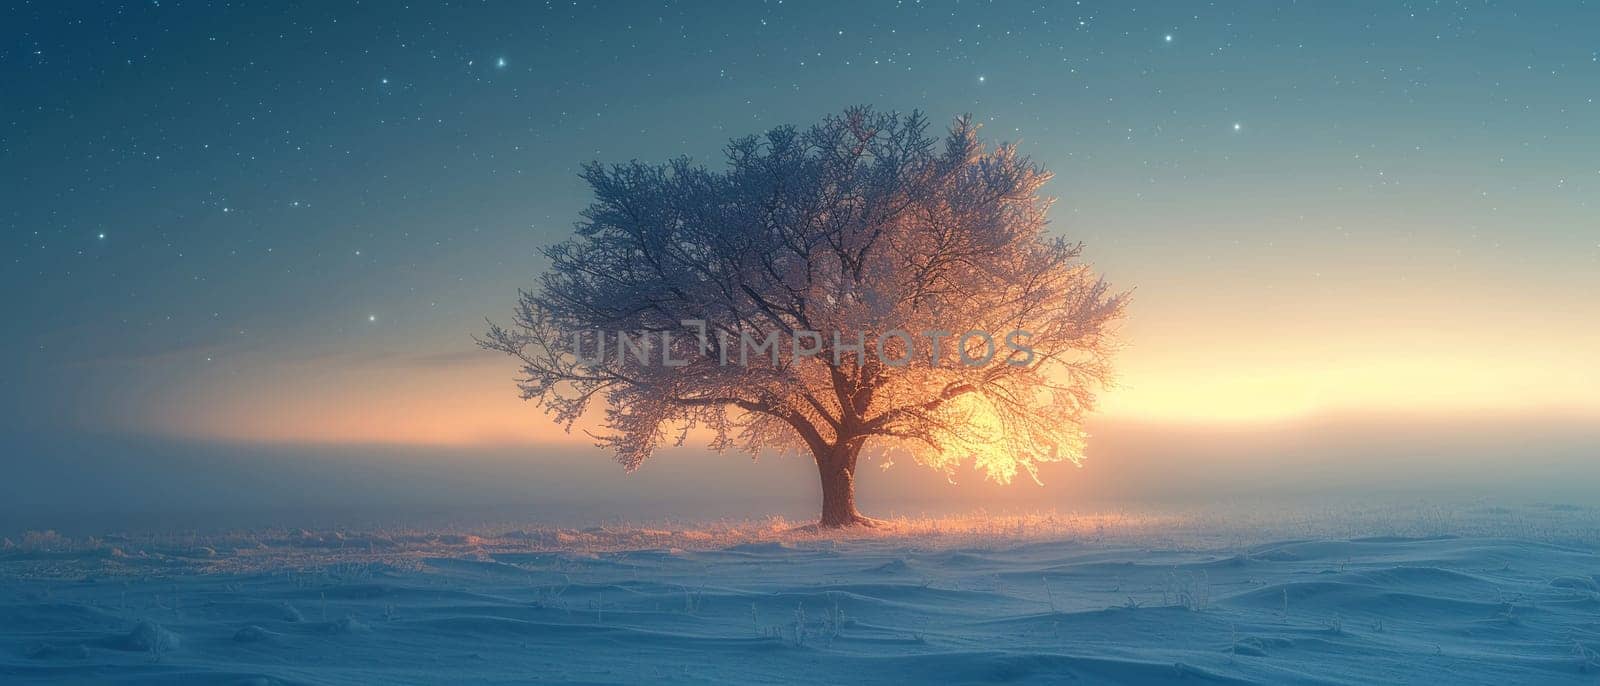 Lone tree in a snowy field under northern lights by Benzoix